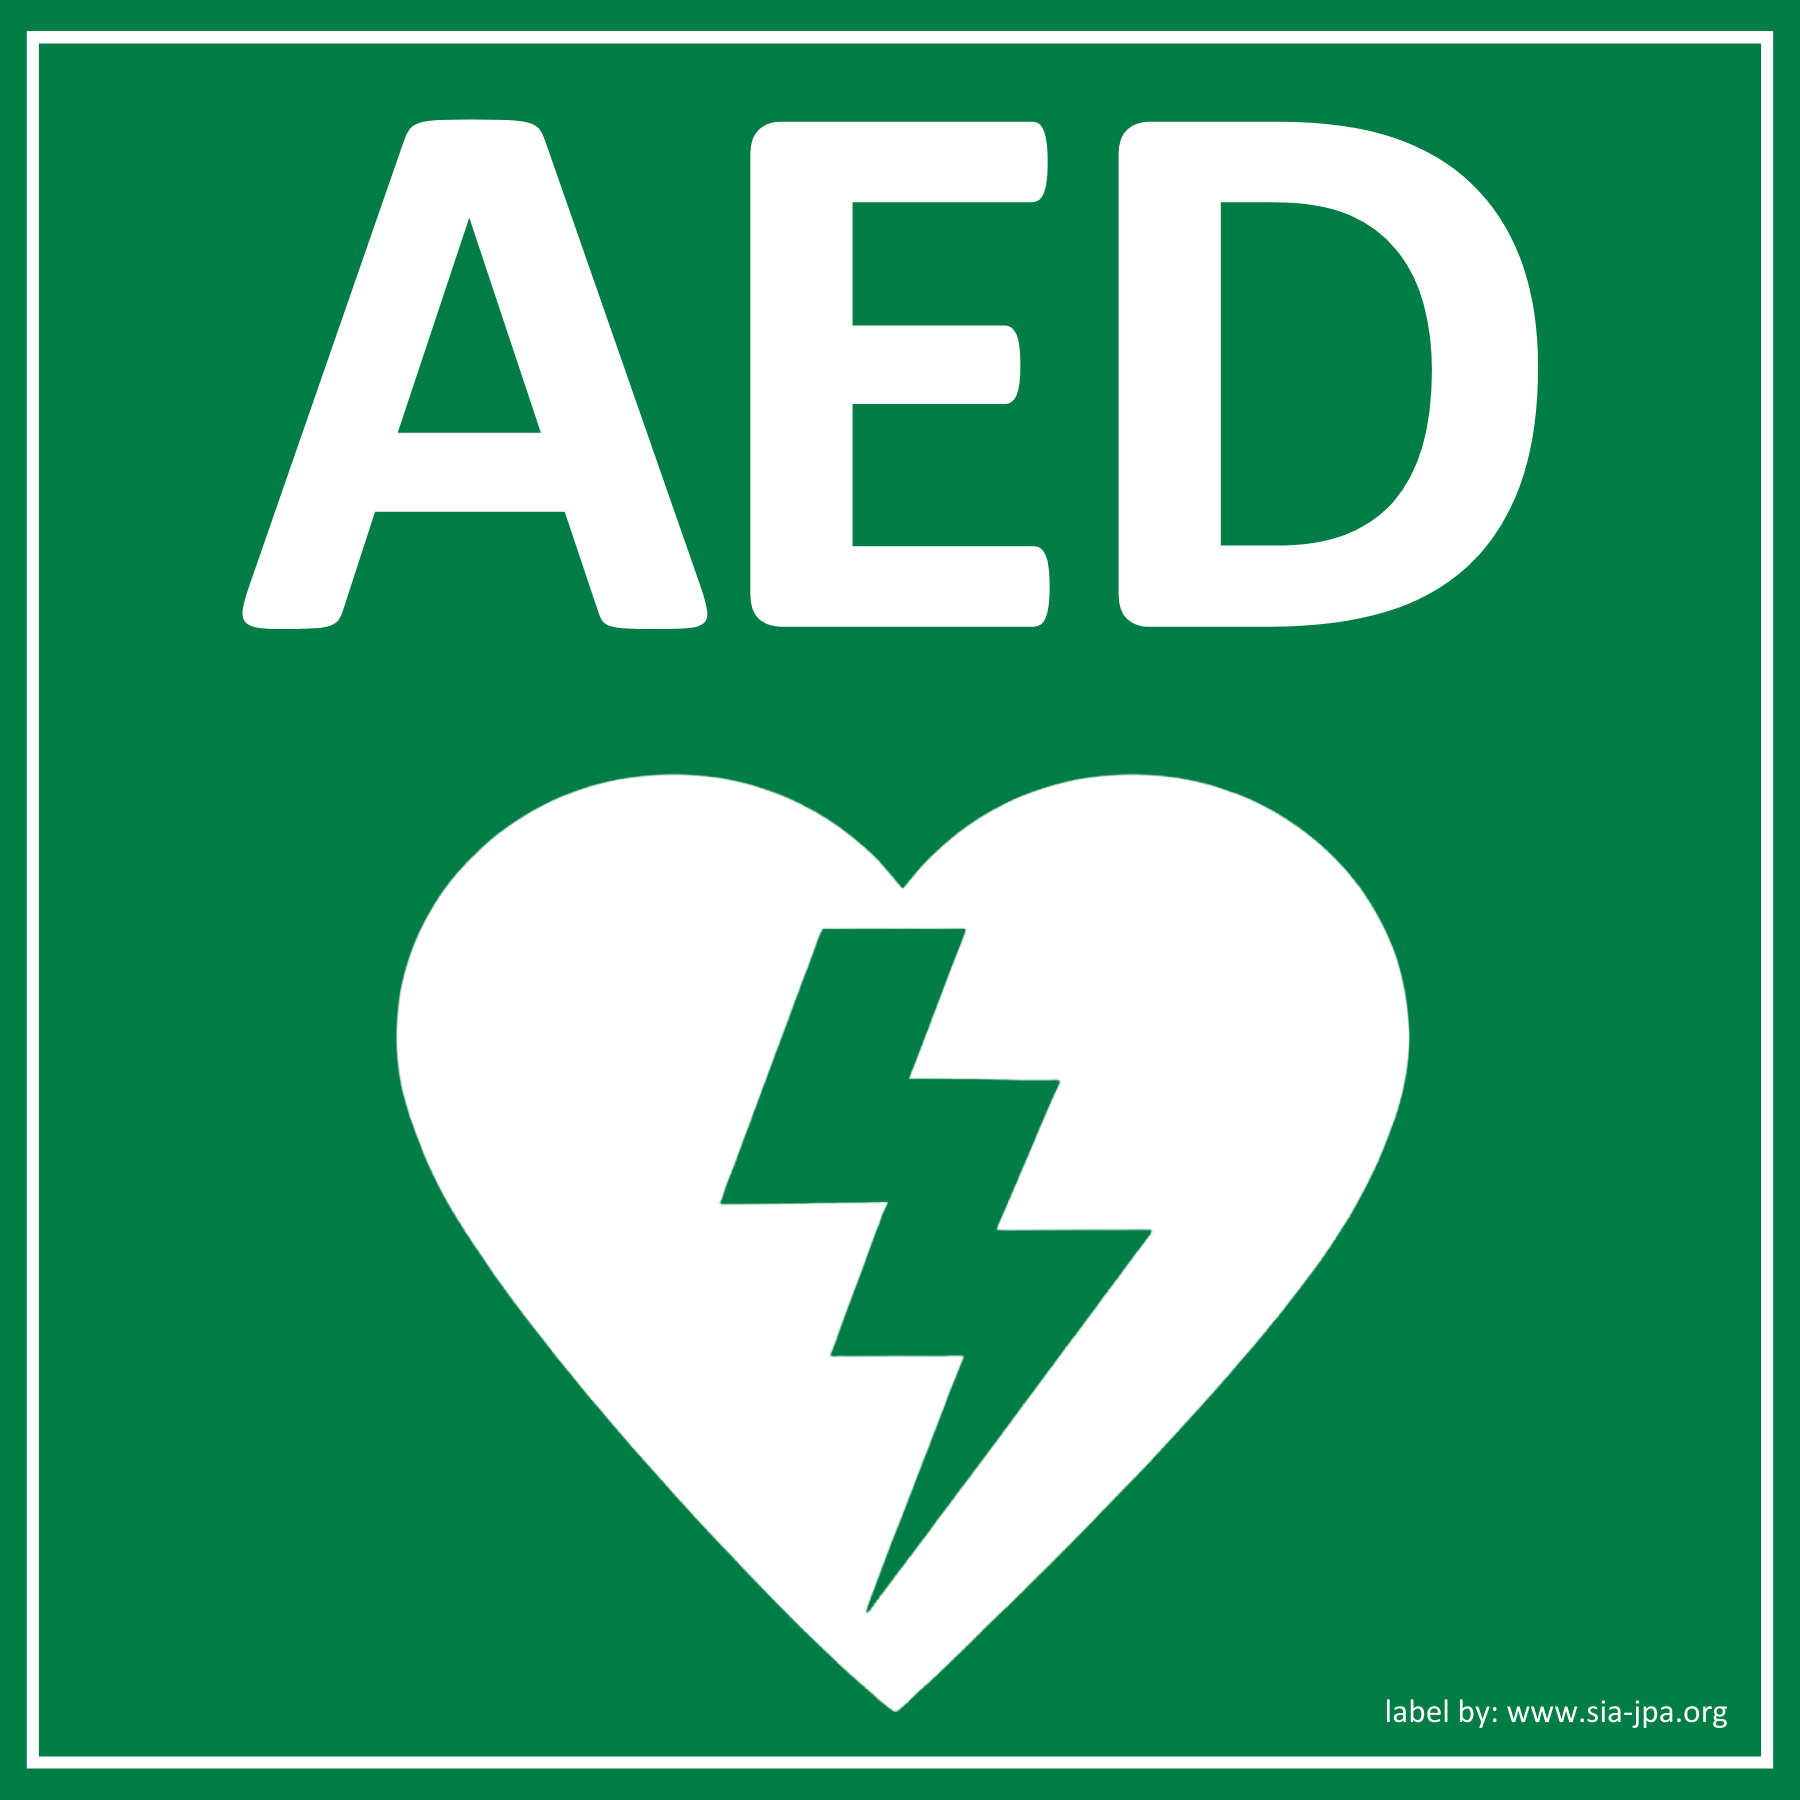 AED text with large heart shape symbol containing lightning bolt graphic below.